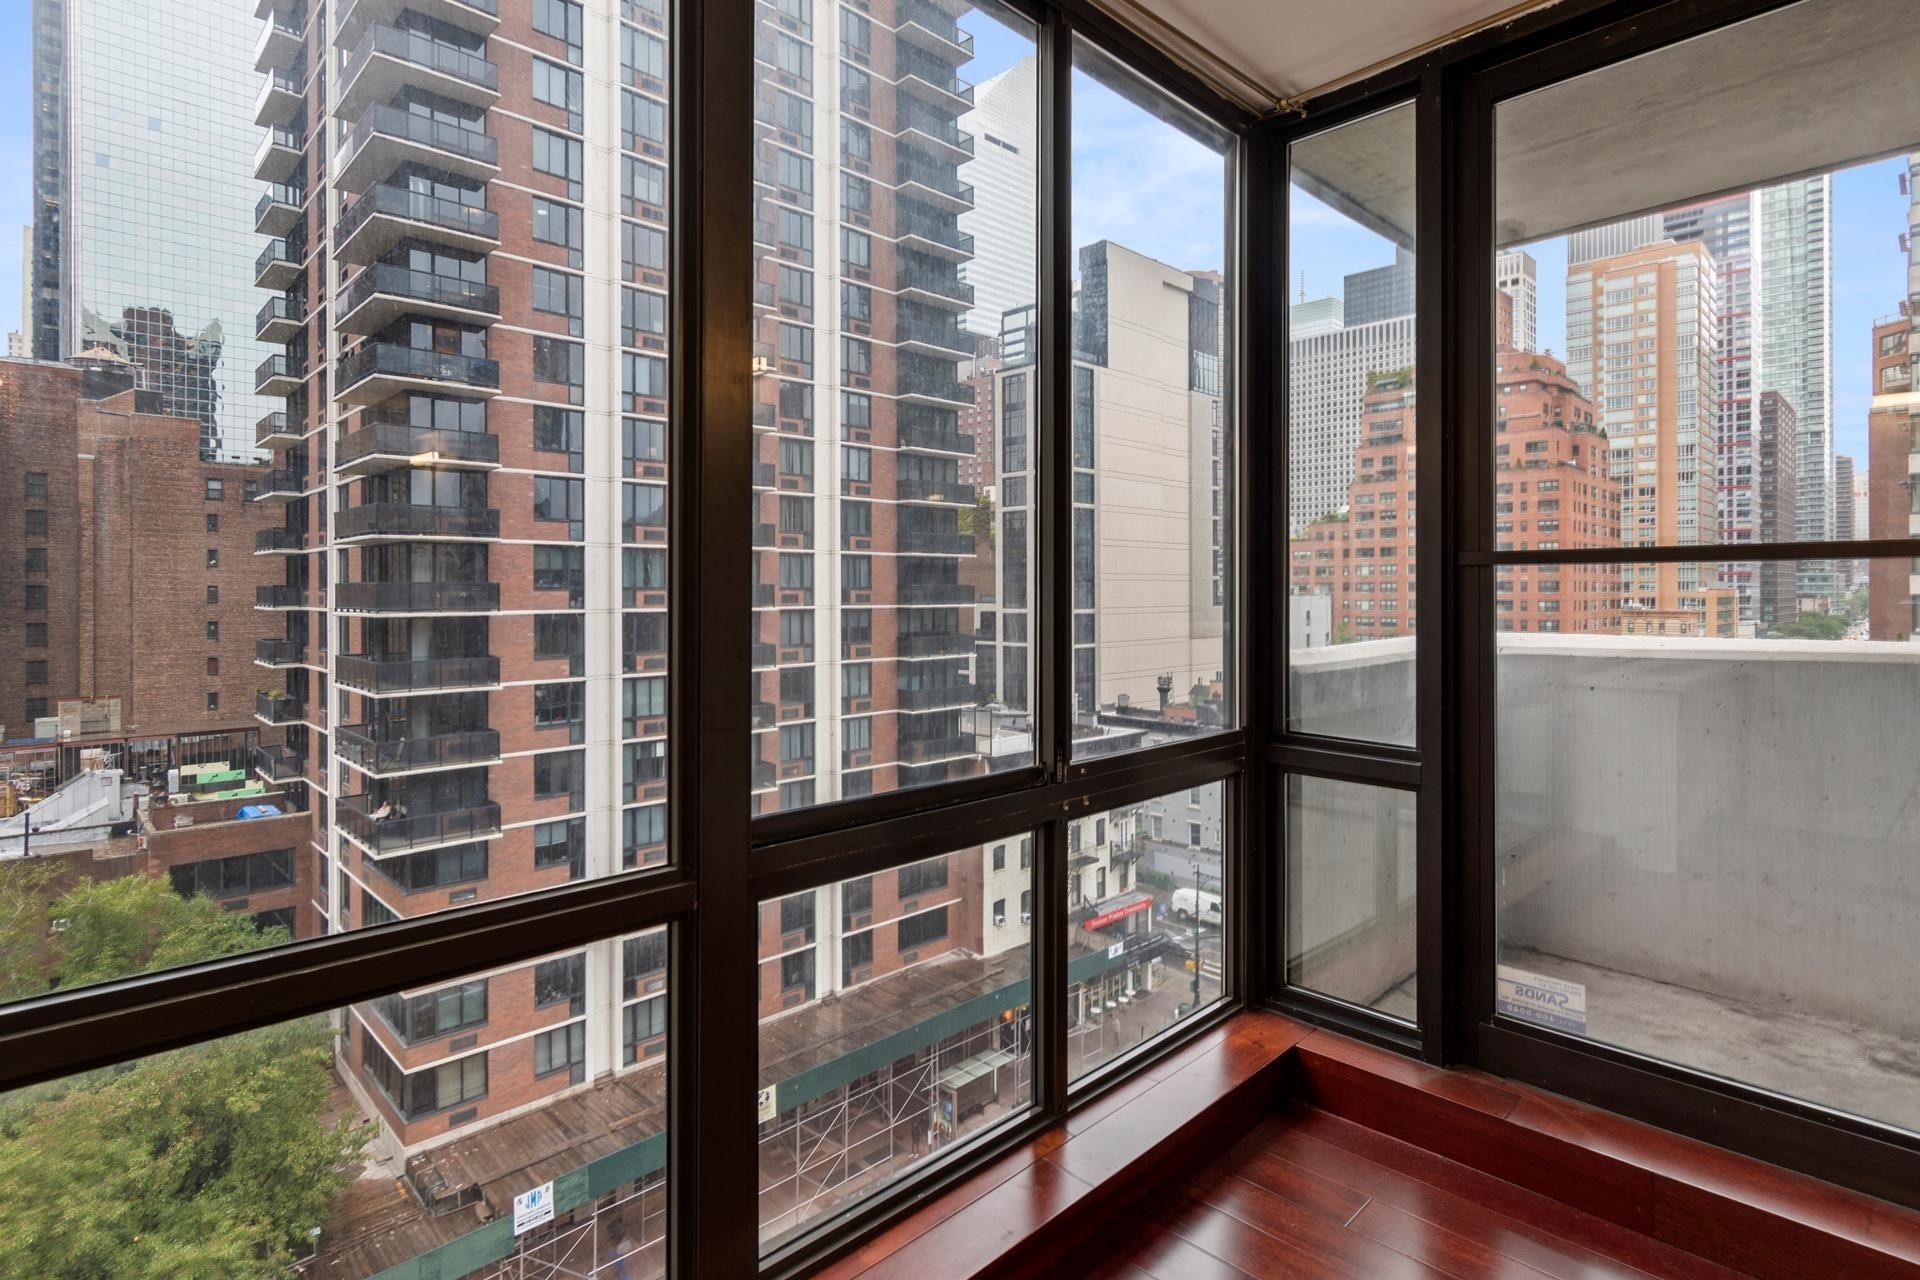 6. Condominiums for Sale at Peregrine Tower, 303 E 49TH ST, 10 Turtle Bay, New York, New York 10022